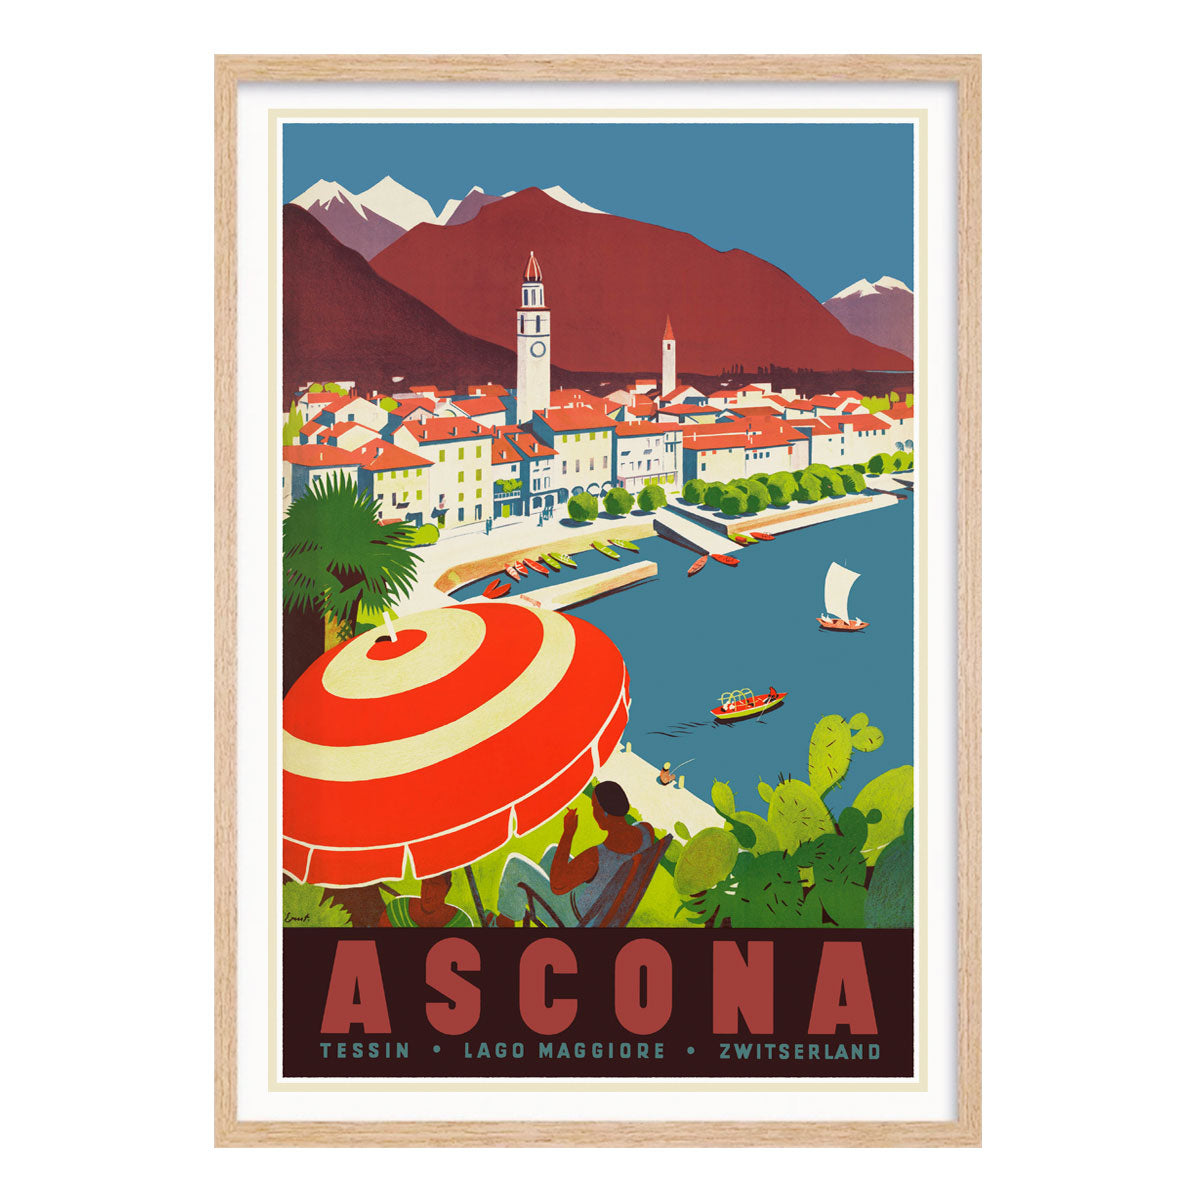 Ascona Switzerland vintage retro poster print in oak frame from Places We Luv